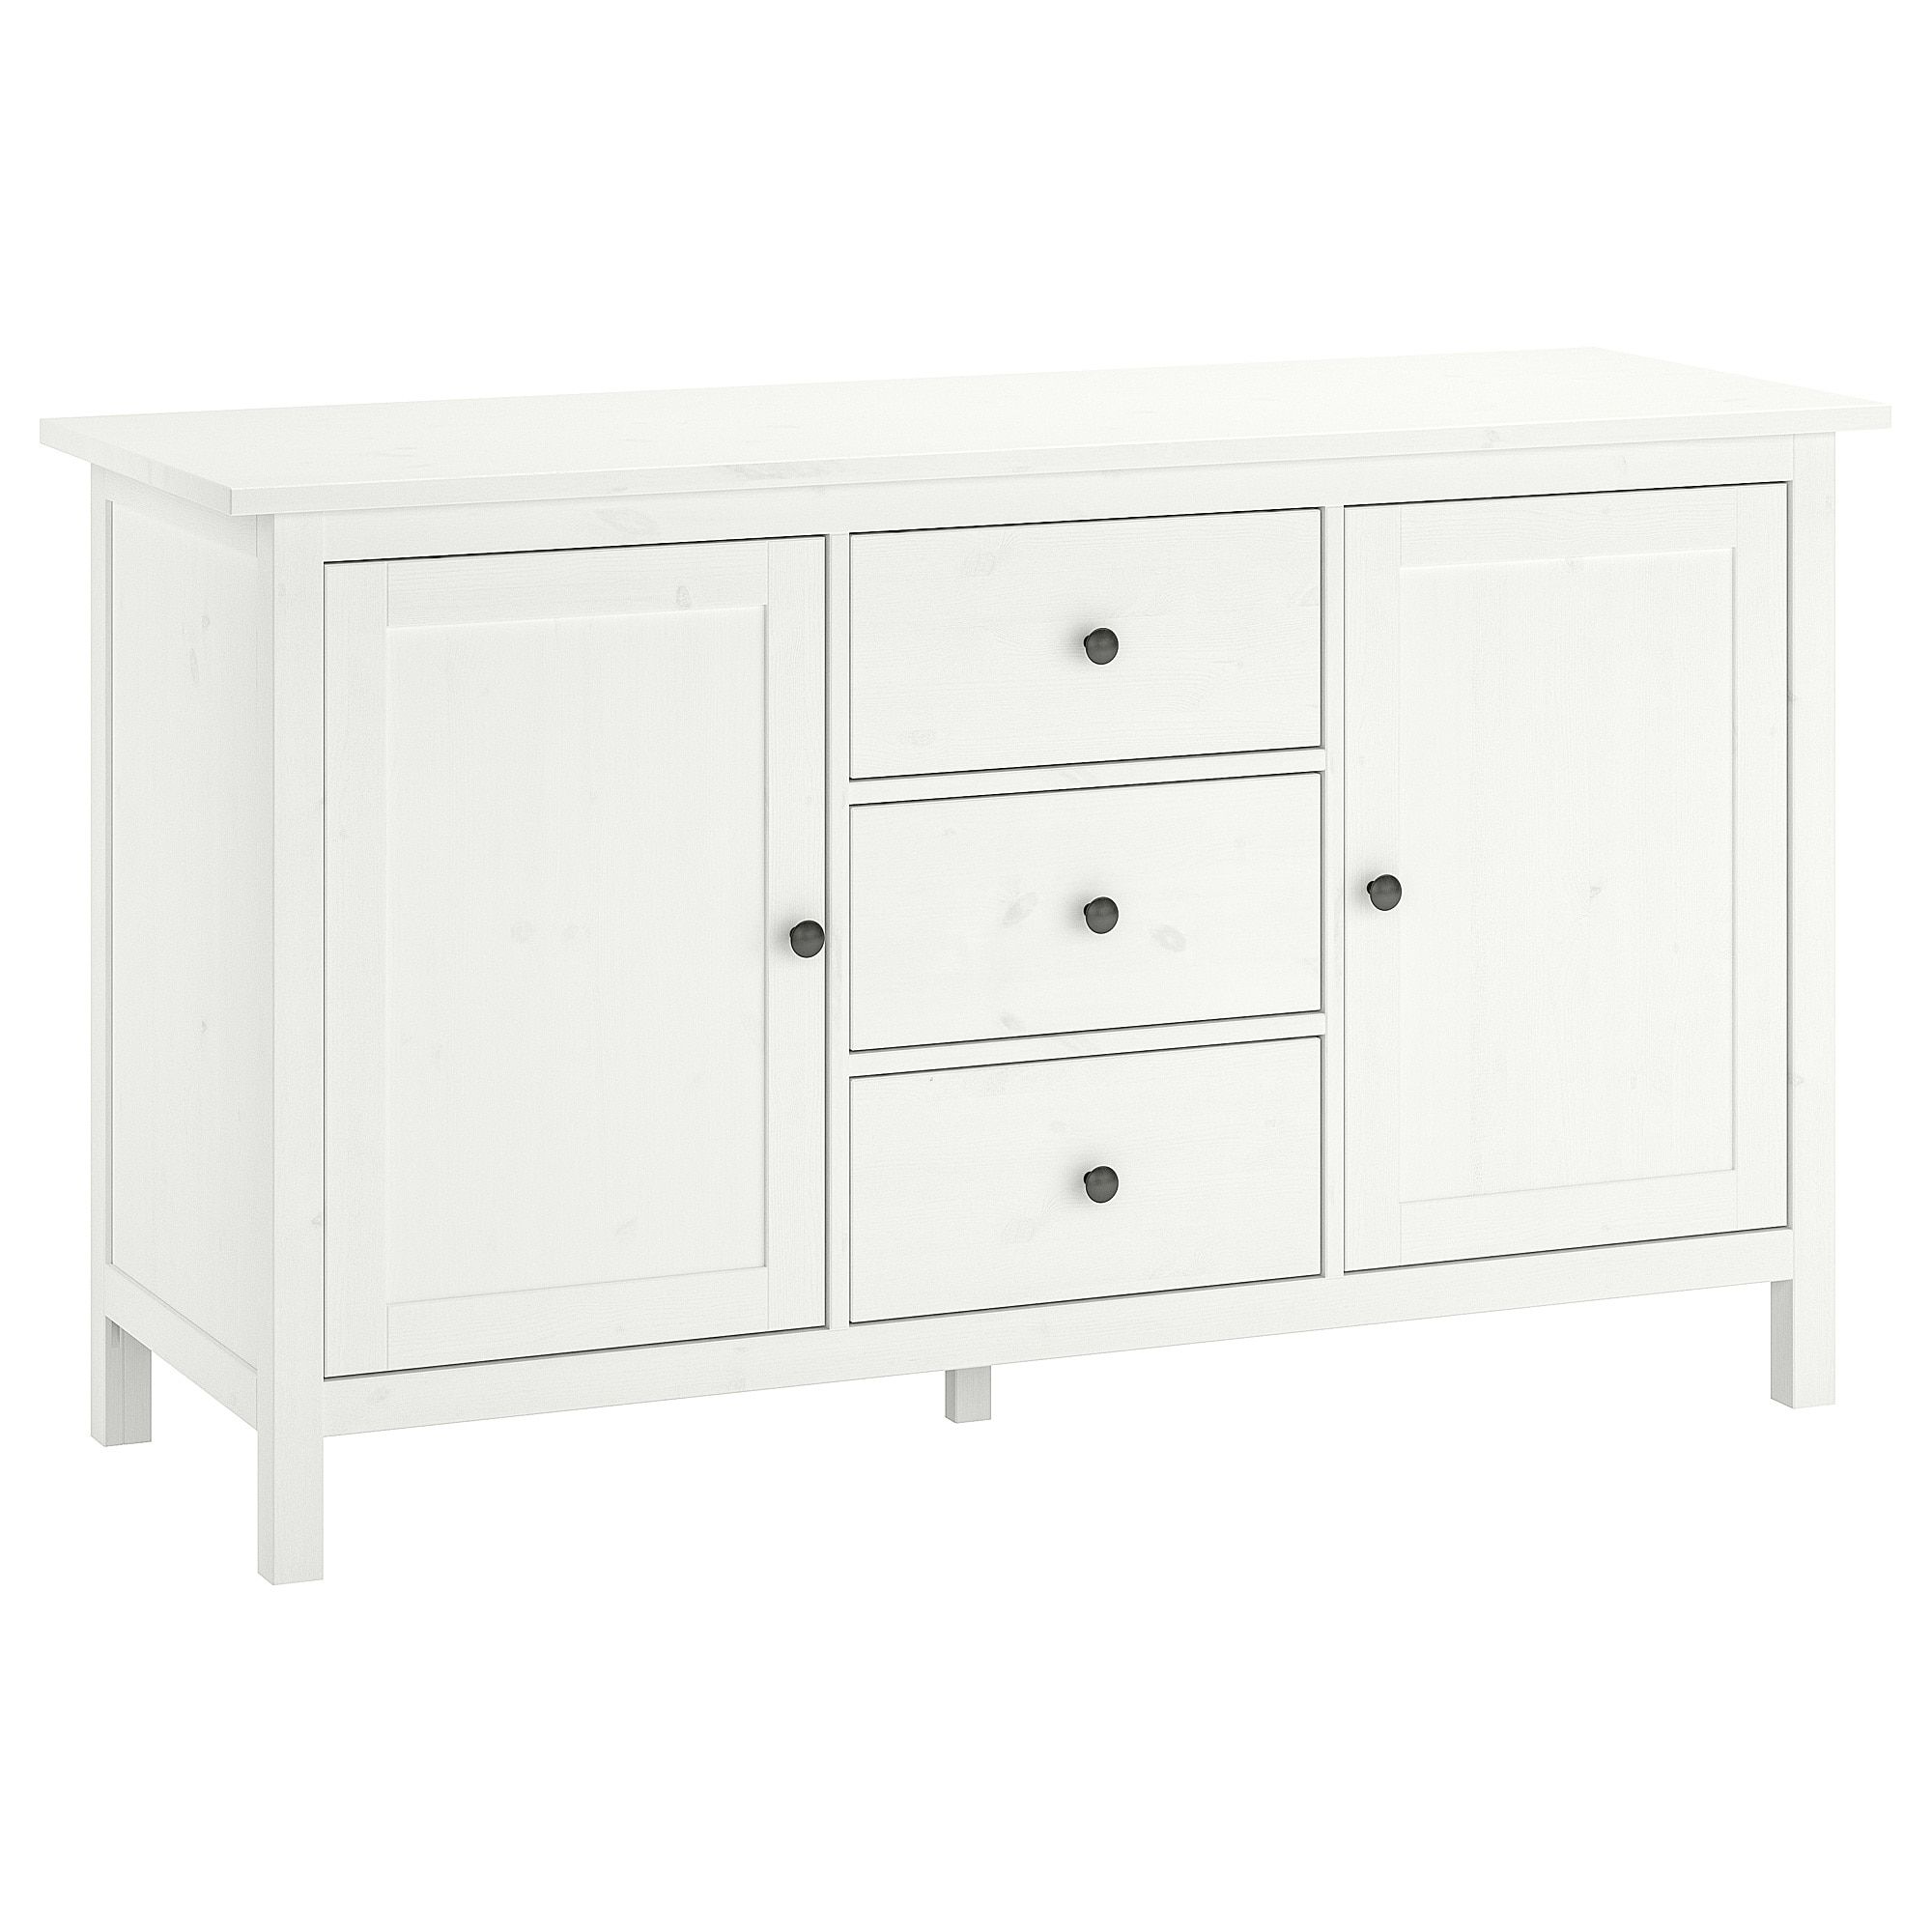 Hemnes – Sideboard, White Stain Throughout South Miami Sideboards (View 14 of 20)